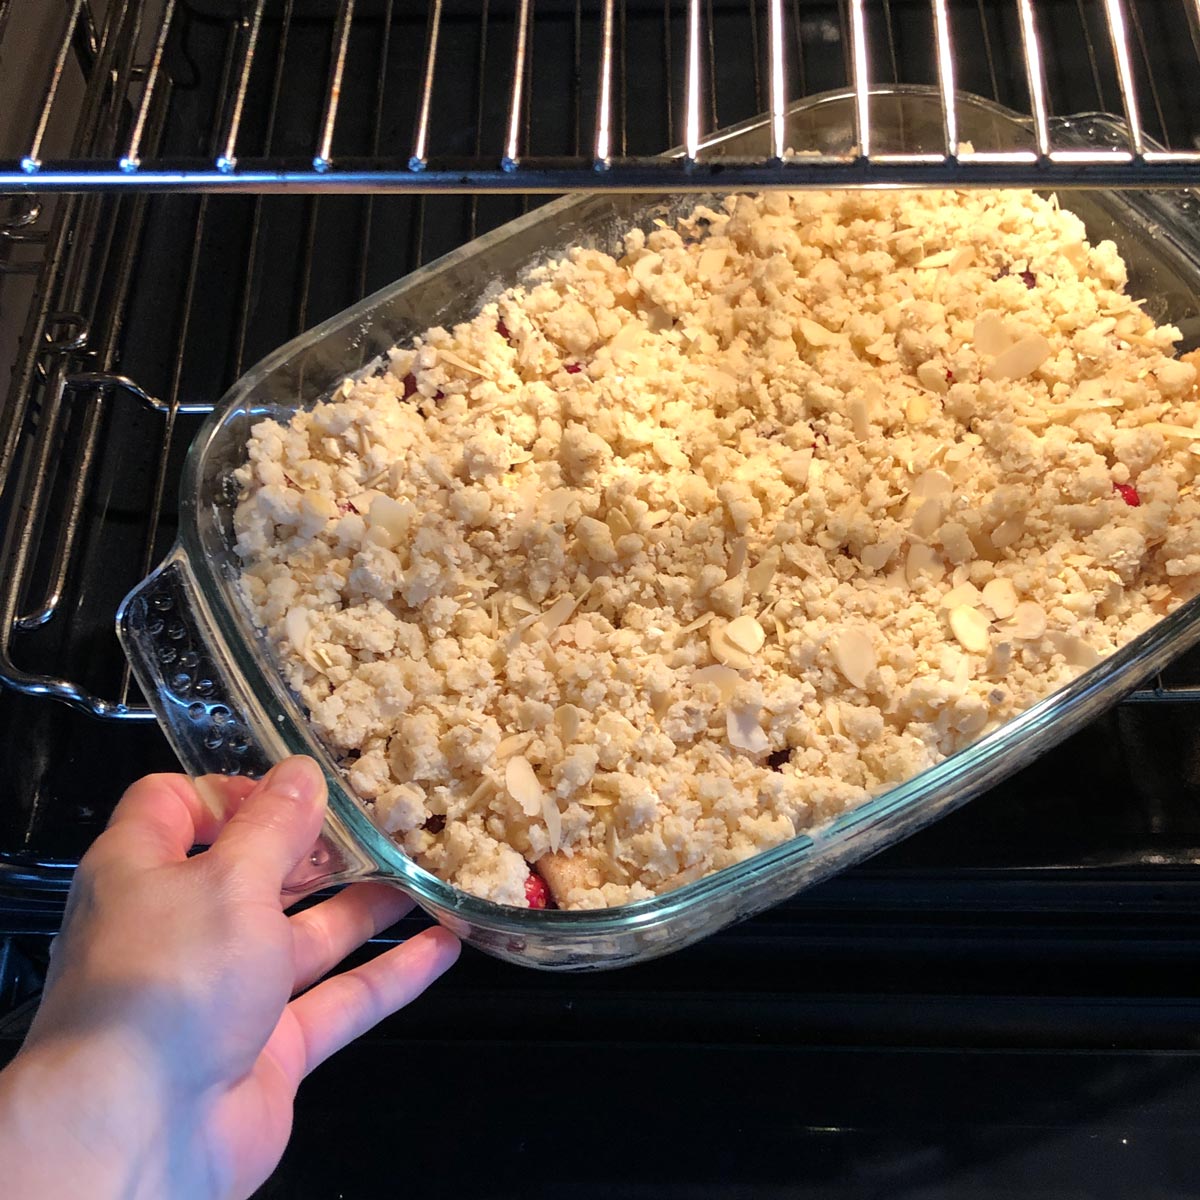 A glass baking dish with apple crumble being inserted into the oven.